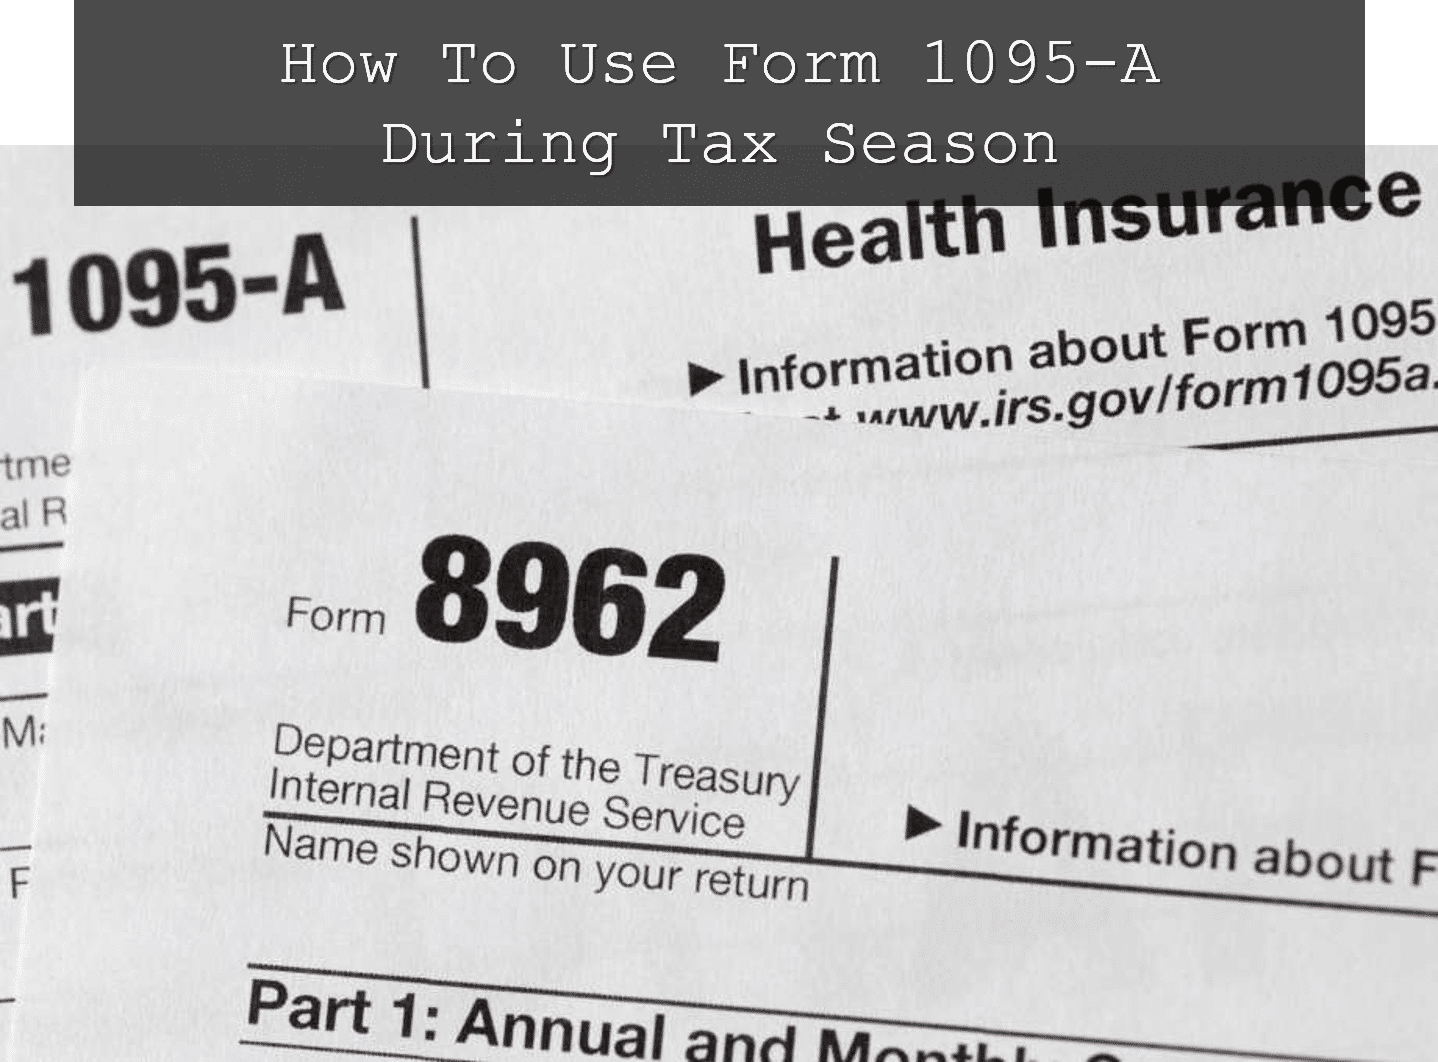 How To Use Form 1095-A During Tax Season